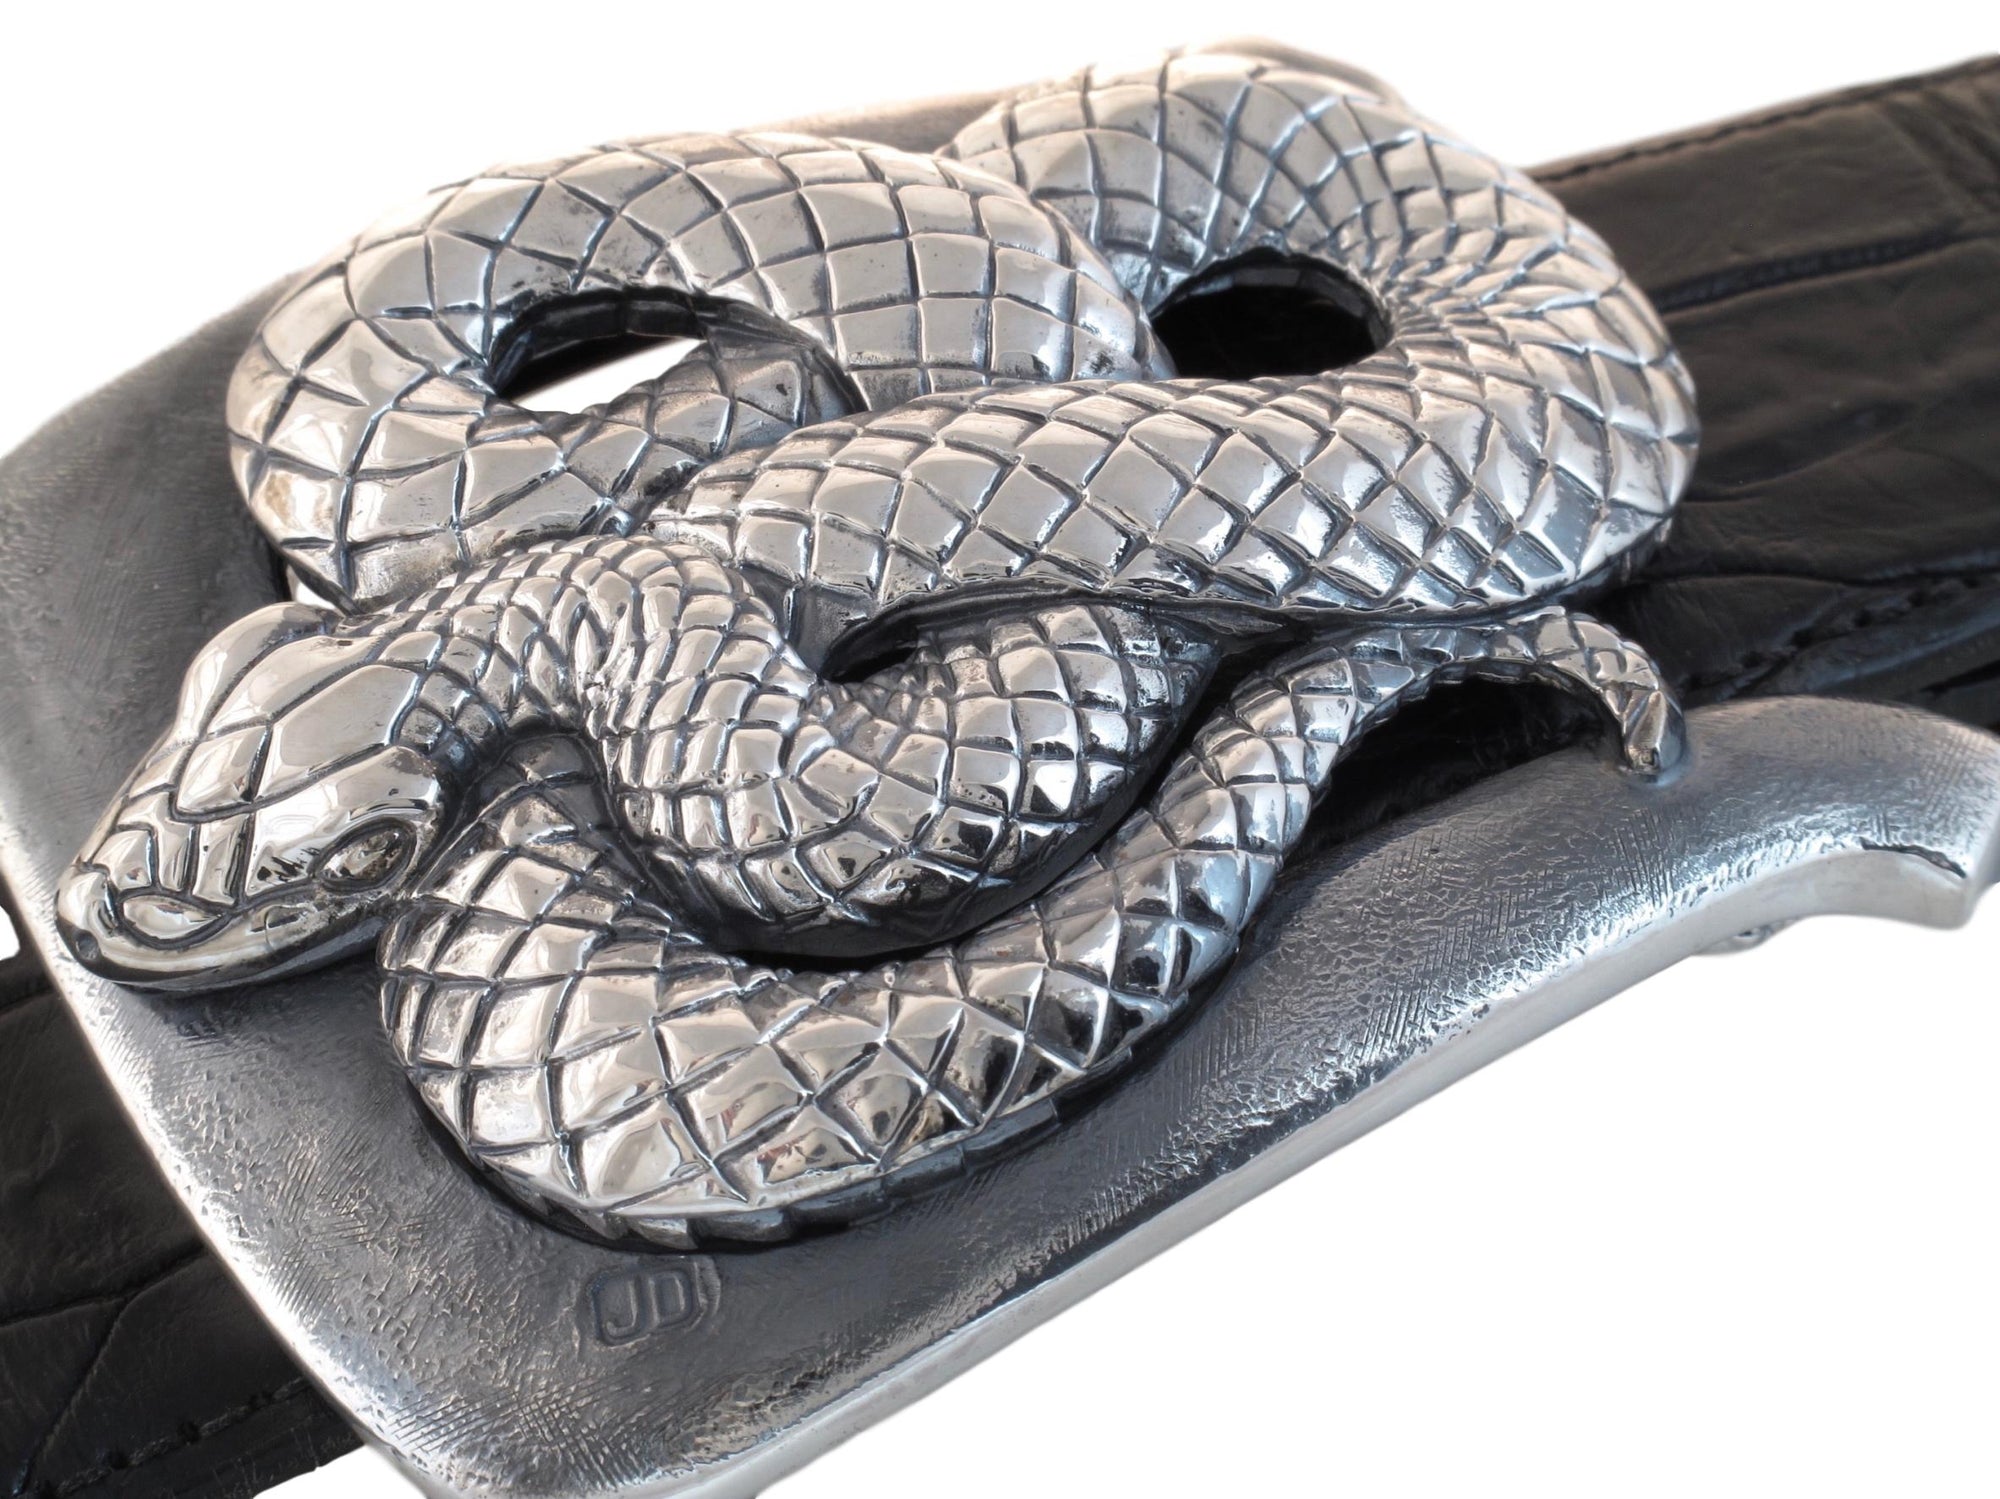 Front view of Coiled Snake buckle with the polished Snake standing in contrast to the distressed, antiqued buckle frame.